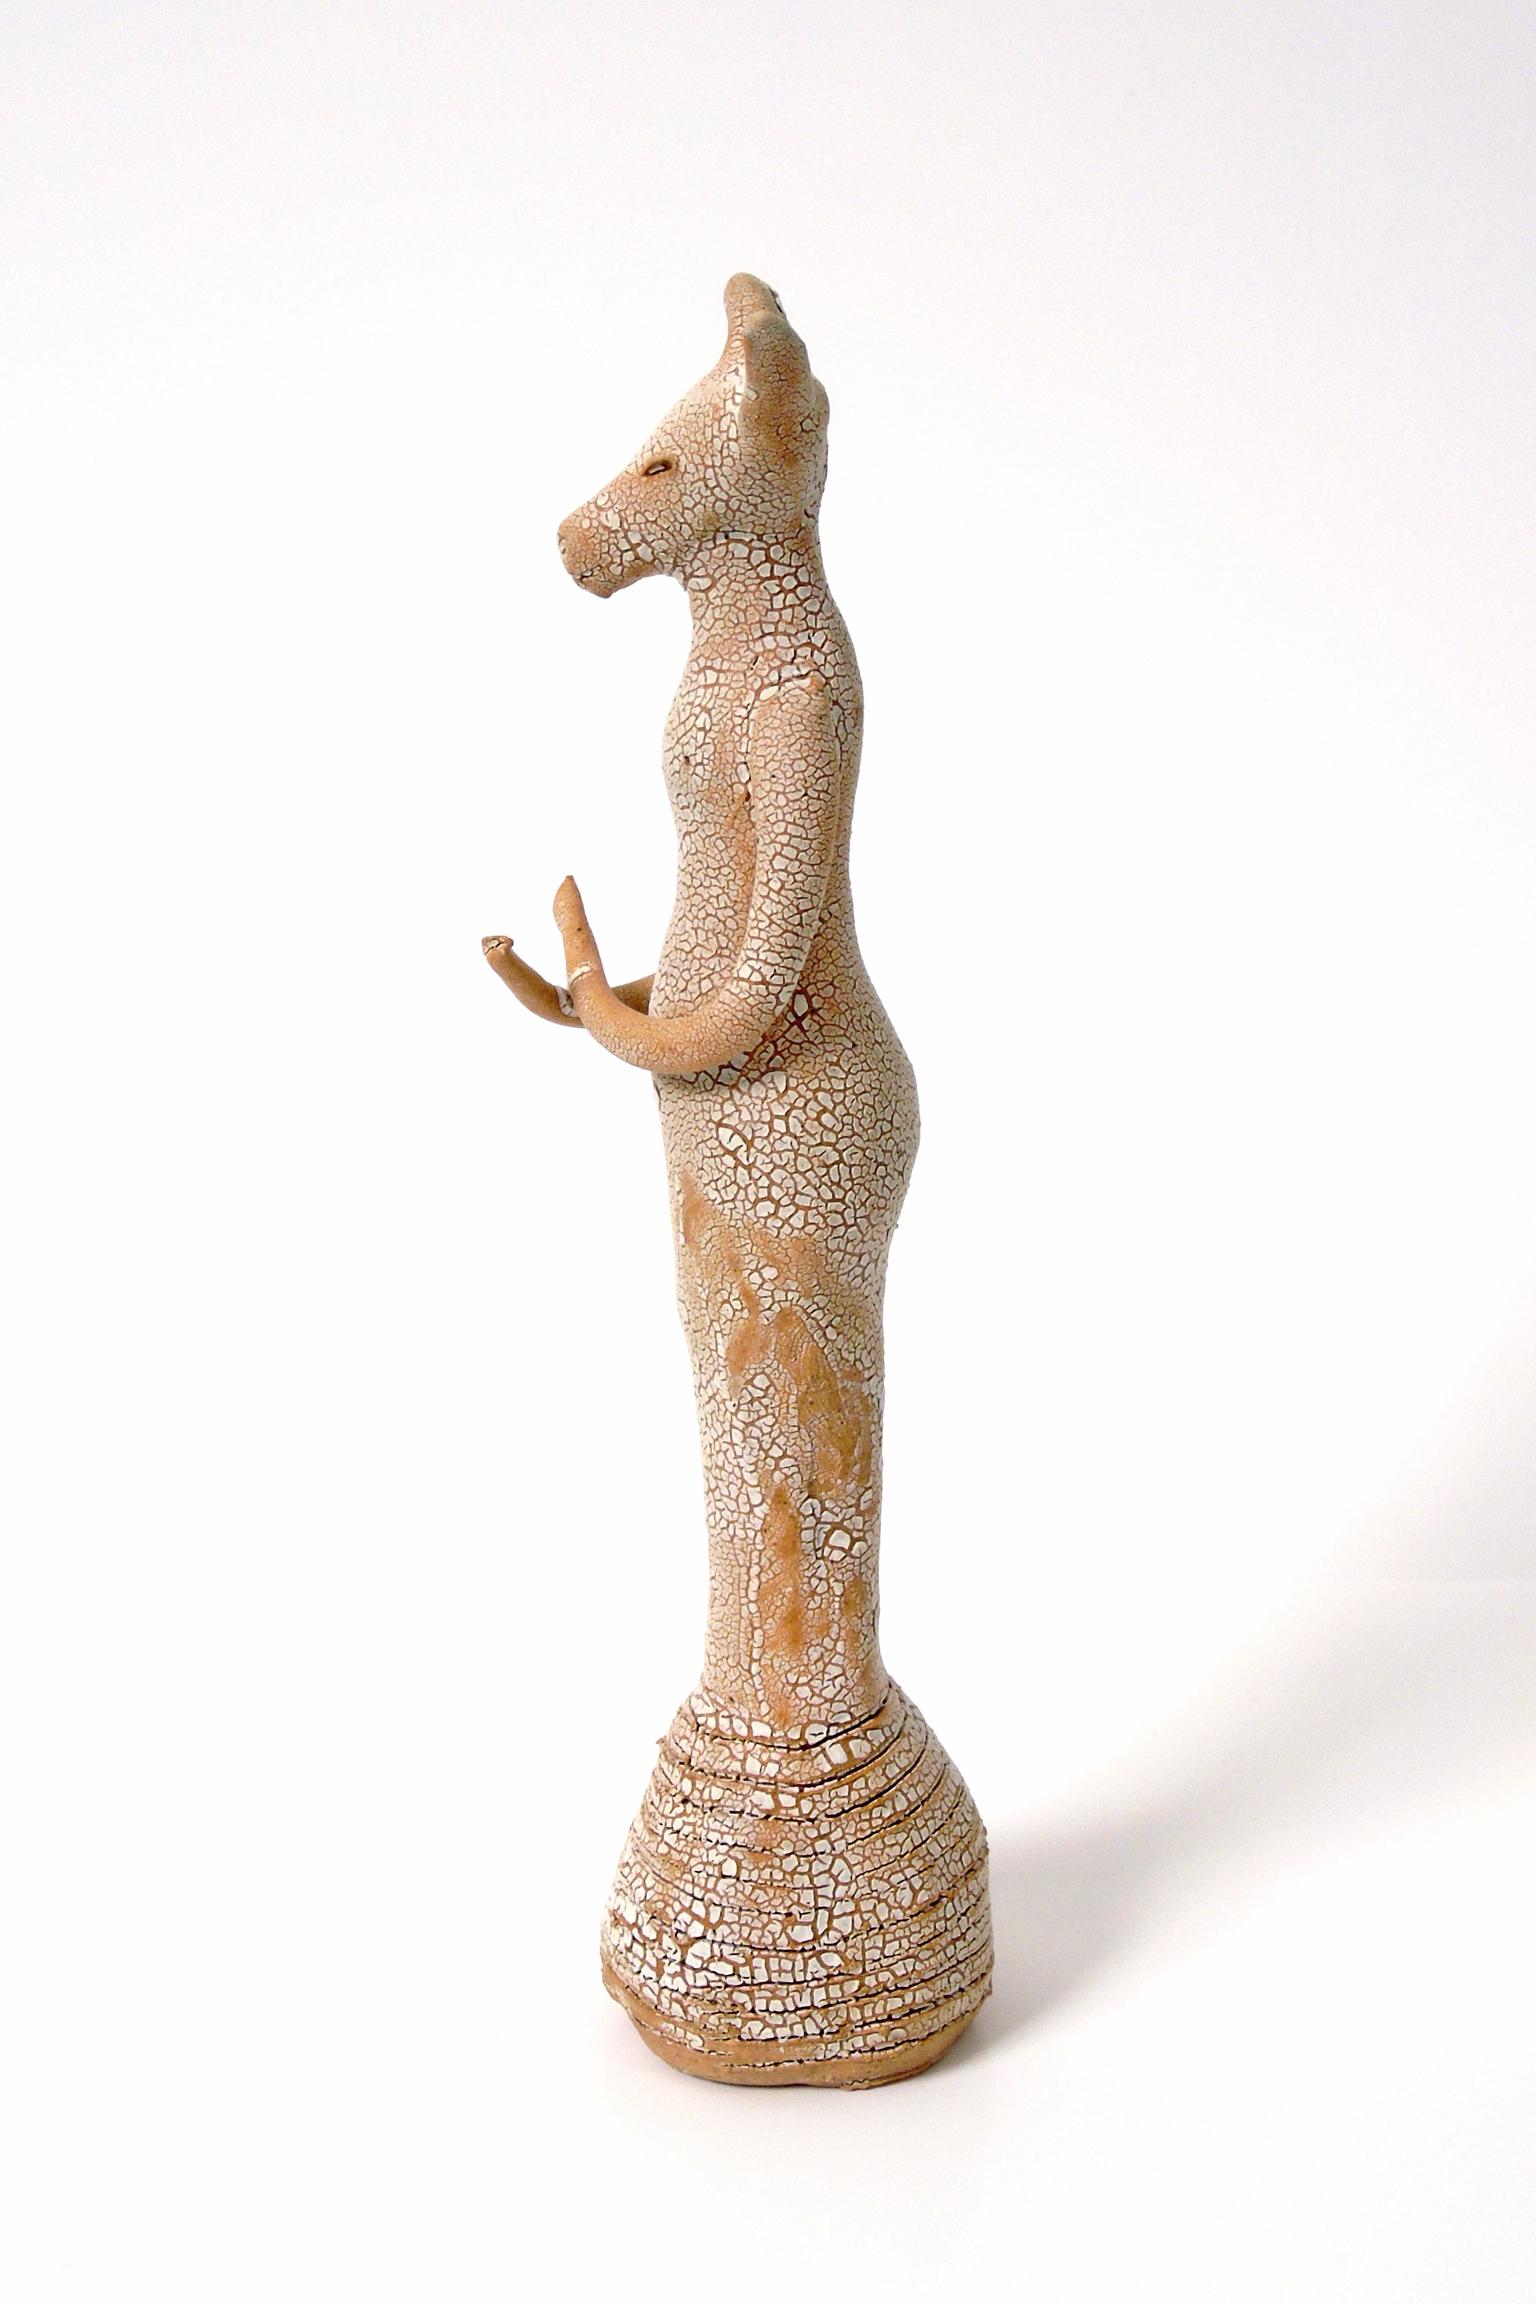 Tiny Fox Totem -82 - Contemporary Sculpture by Robin Whiteman